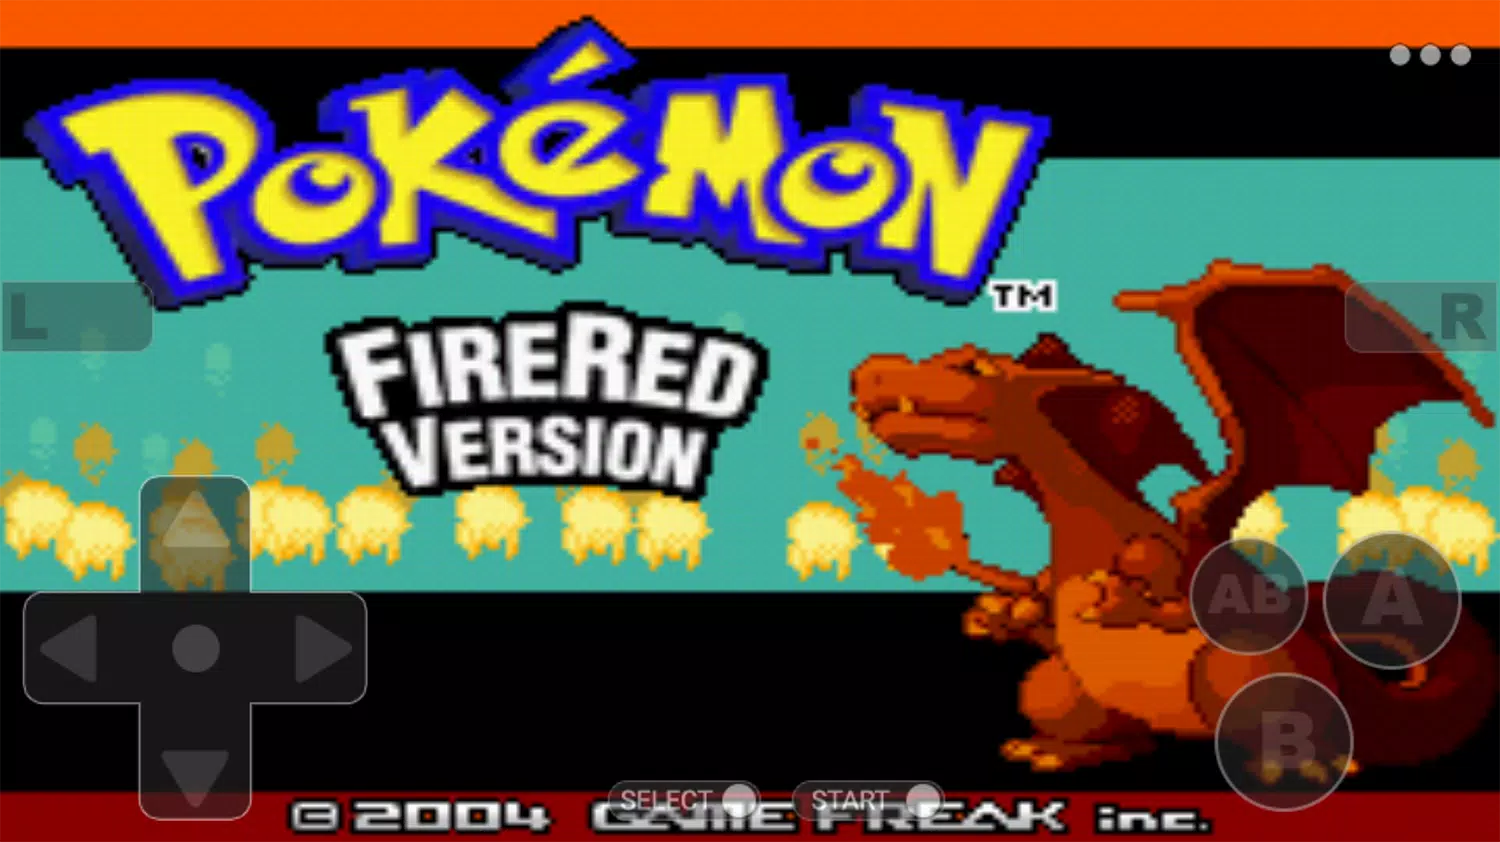 Pokemoon fire version - Free GBA Classic Game APK for Android Download